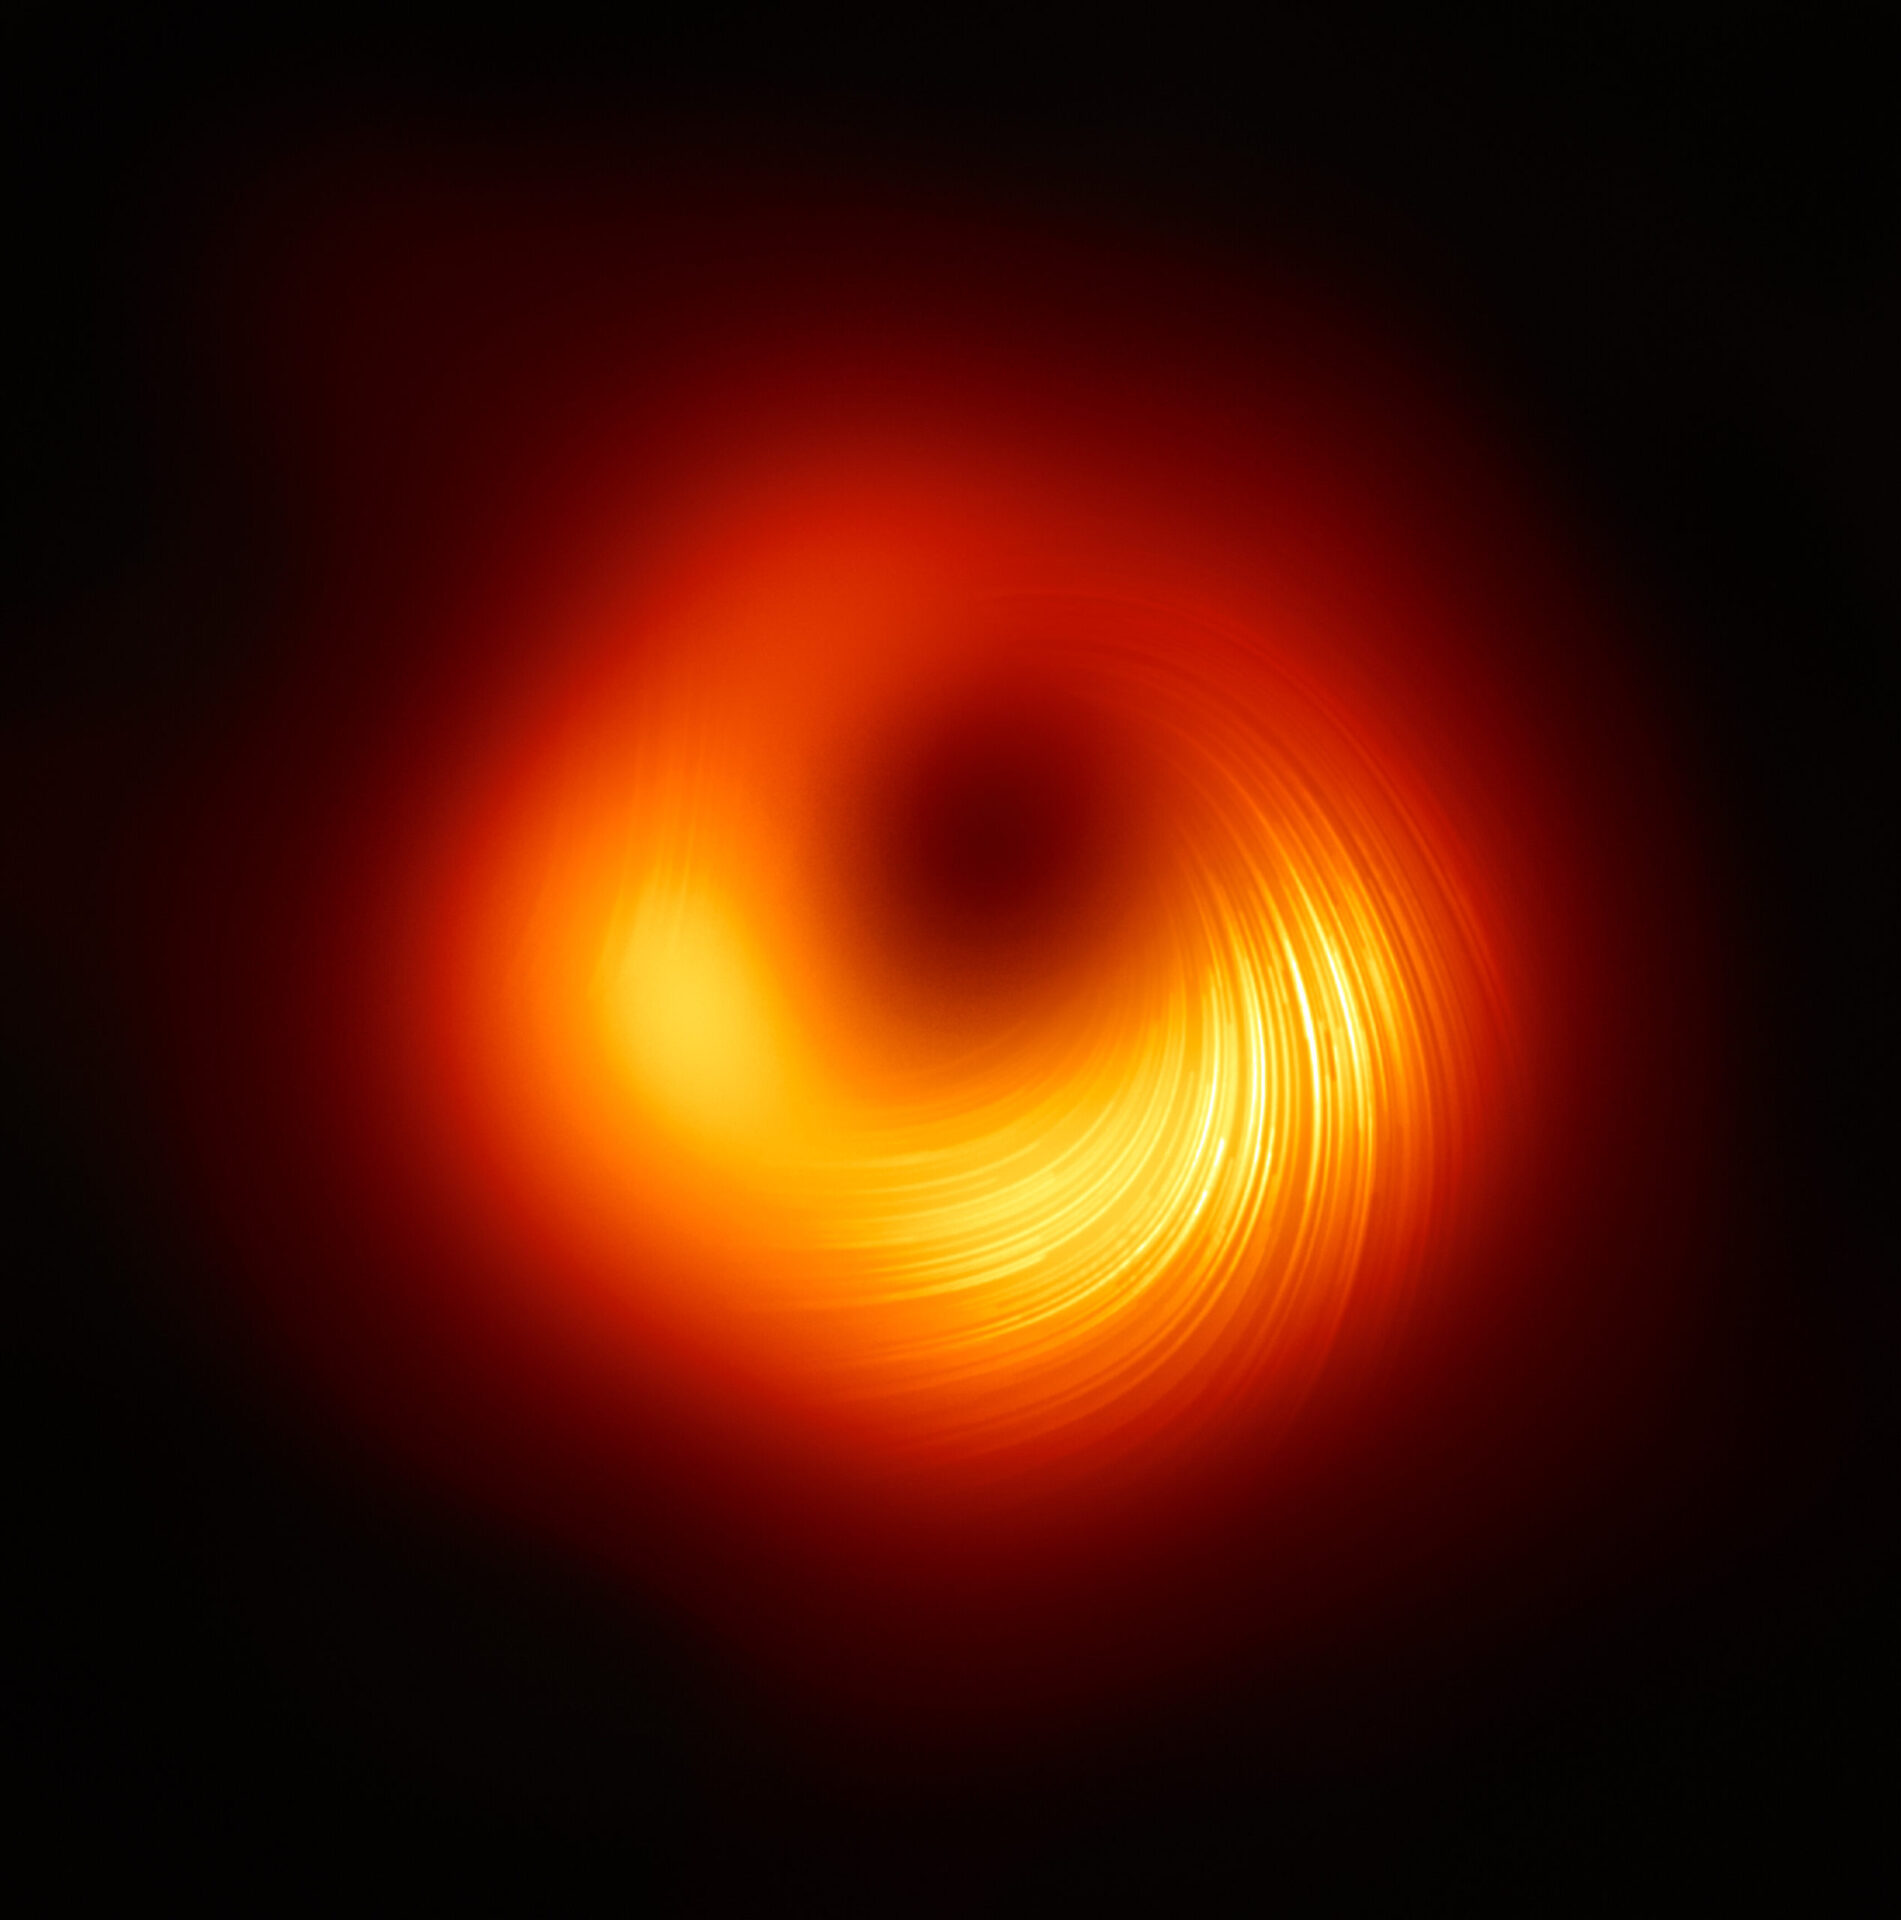 <p>The Event Horizon Telescope (EHT) collaboration, who produced the first ever image of a black hole released in 2019, has today a new view of the massive object at the centre of the Messier 87 (M87) galaxy: how it looks in polarised light. This is the first time astronomers have been able to measure polarisation, a signature of magnetic fields, this close to the edge of a black hole. </p>
<p>This image shows the polarised view of the black hole in M87. The lines mark the orientation of polarisation, which is related to the magnetic field around the shadow of the black hole. Credit: EHT Collaboration</p>
